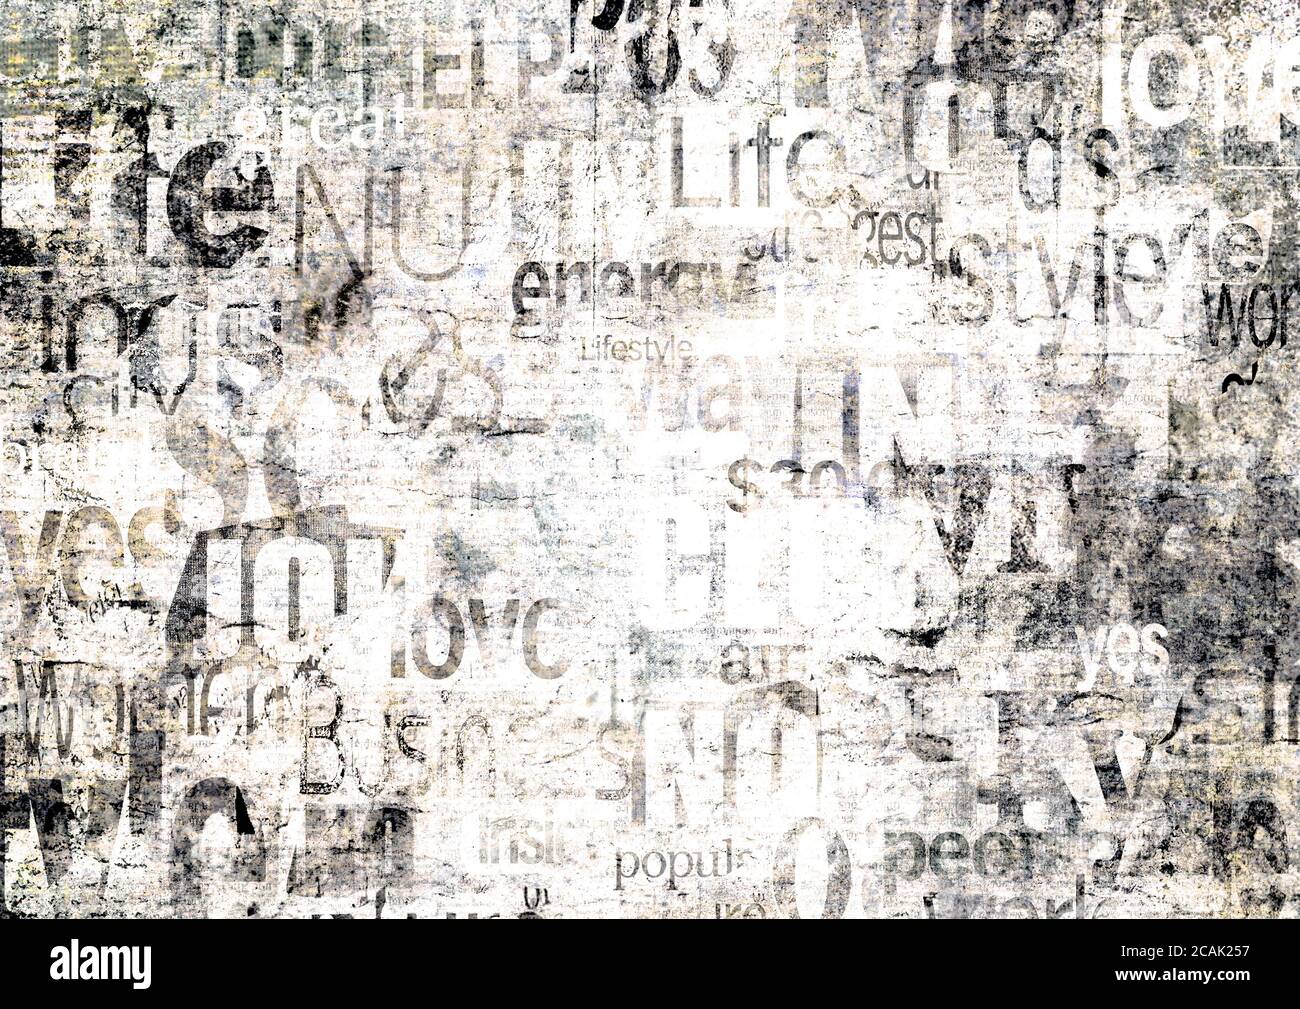 Old newspaper paper grunge with letters, words texture background. Blurred  vintage newspapers textured backdrop. Blur unreadable aged news lettering  horizontal page. Light beige art collage. - Stock Image - Everypixel